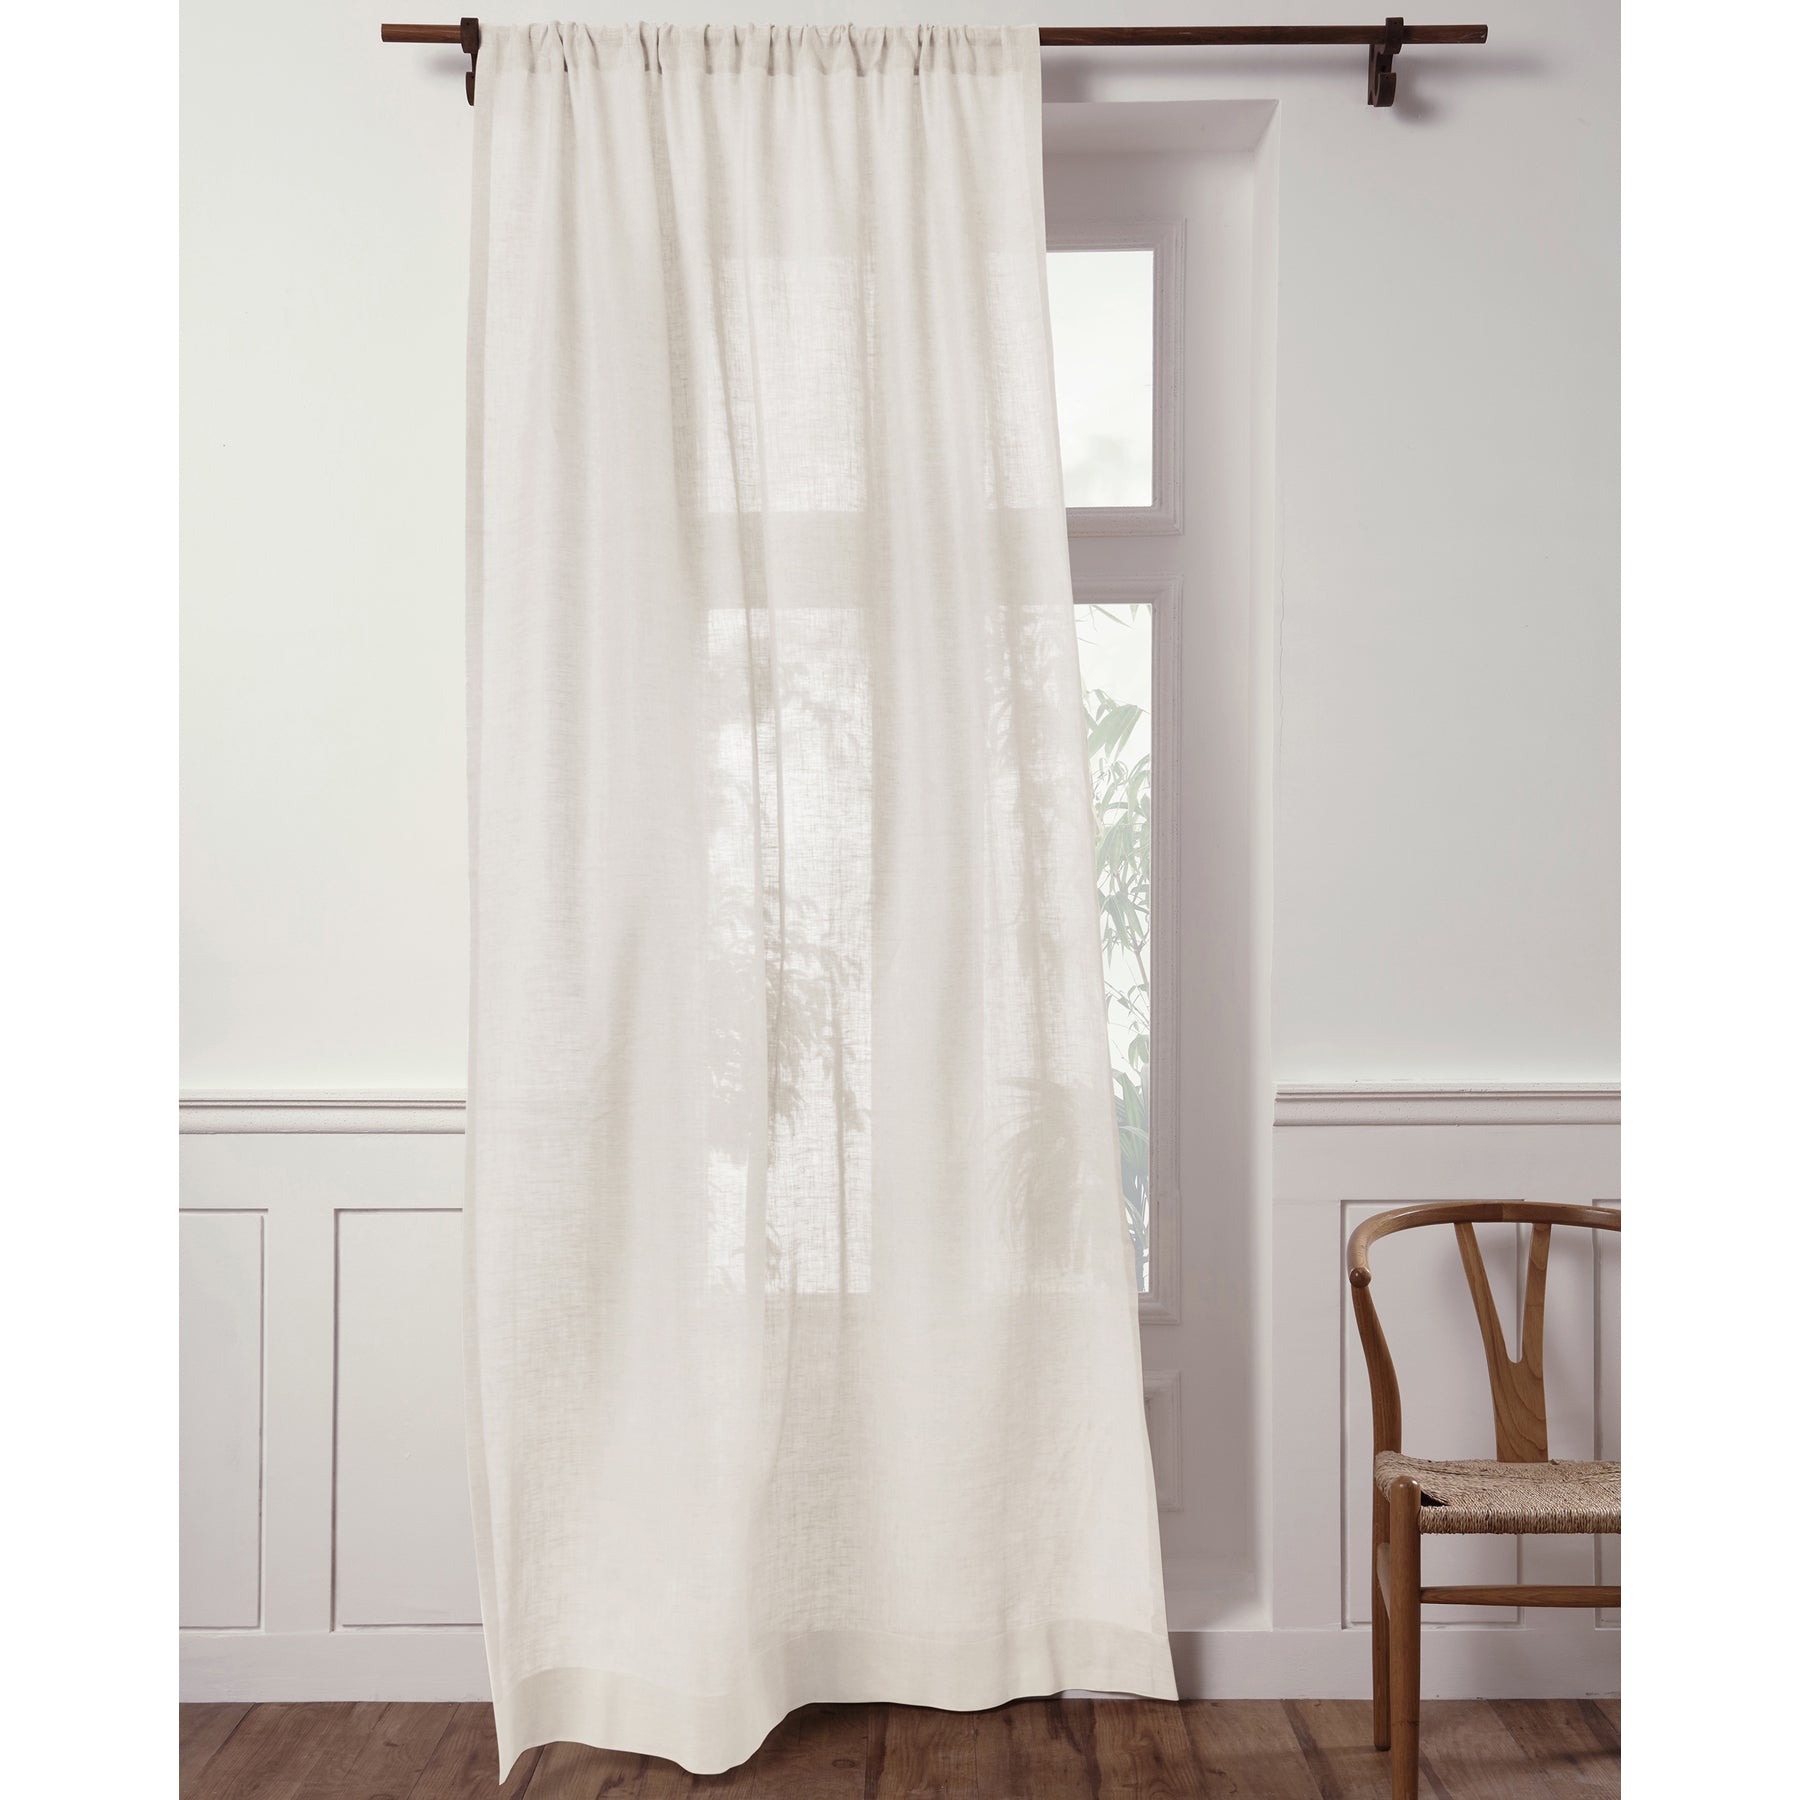 Sheer Curtains For Home | Solino Home